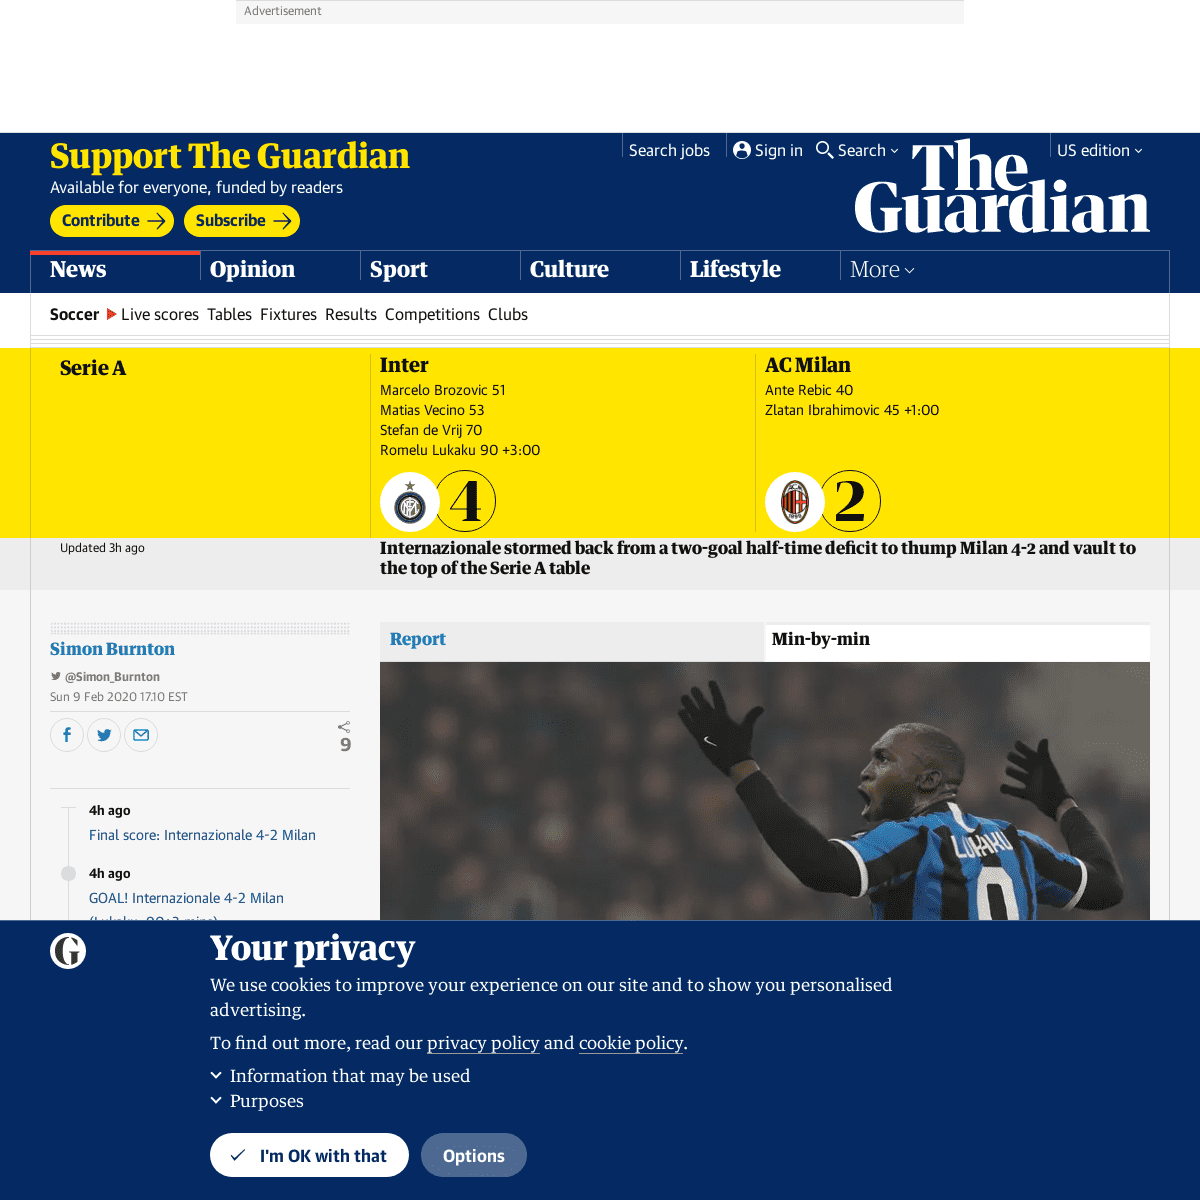 A complete backup of www.theguardian.com/football/live/2020/feb/09/internazionale-ac-milan-serie-a-live